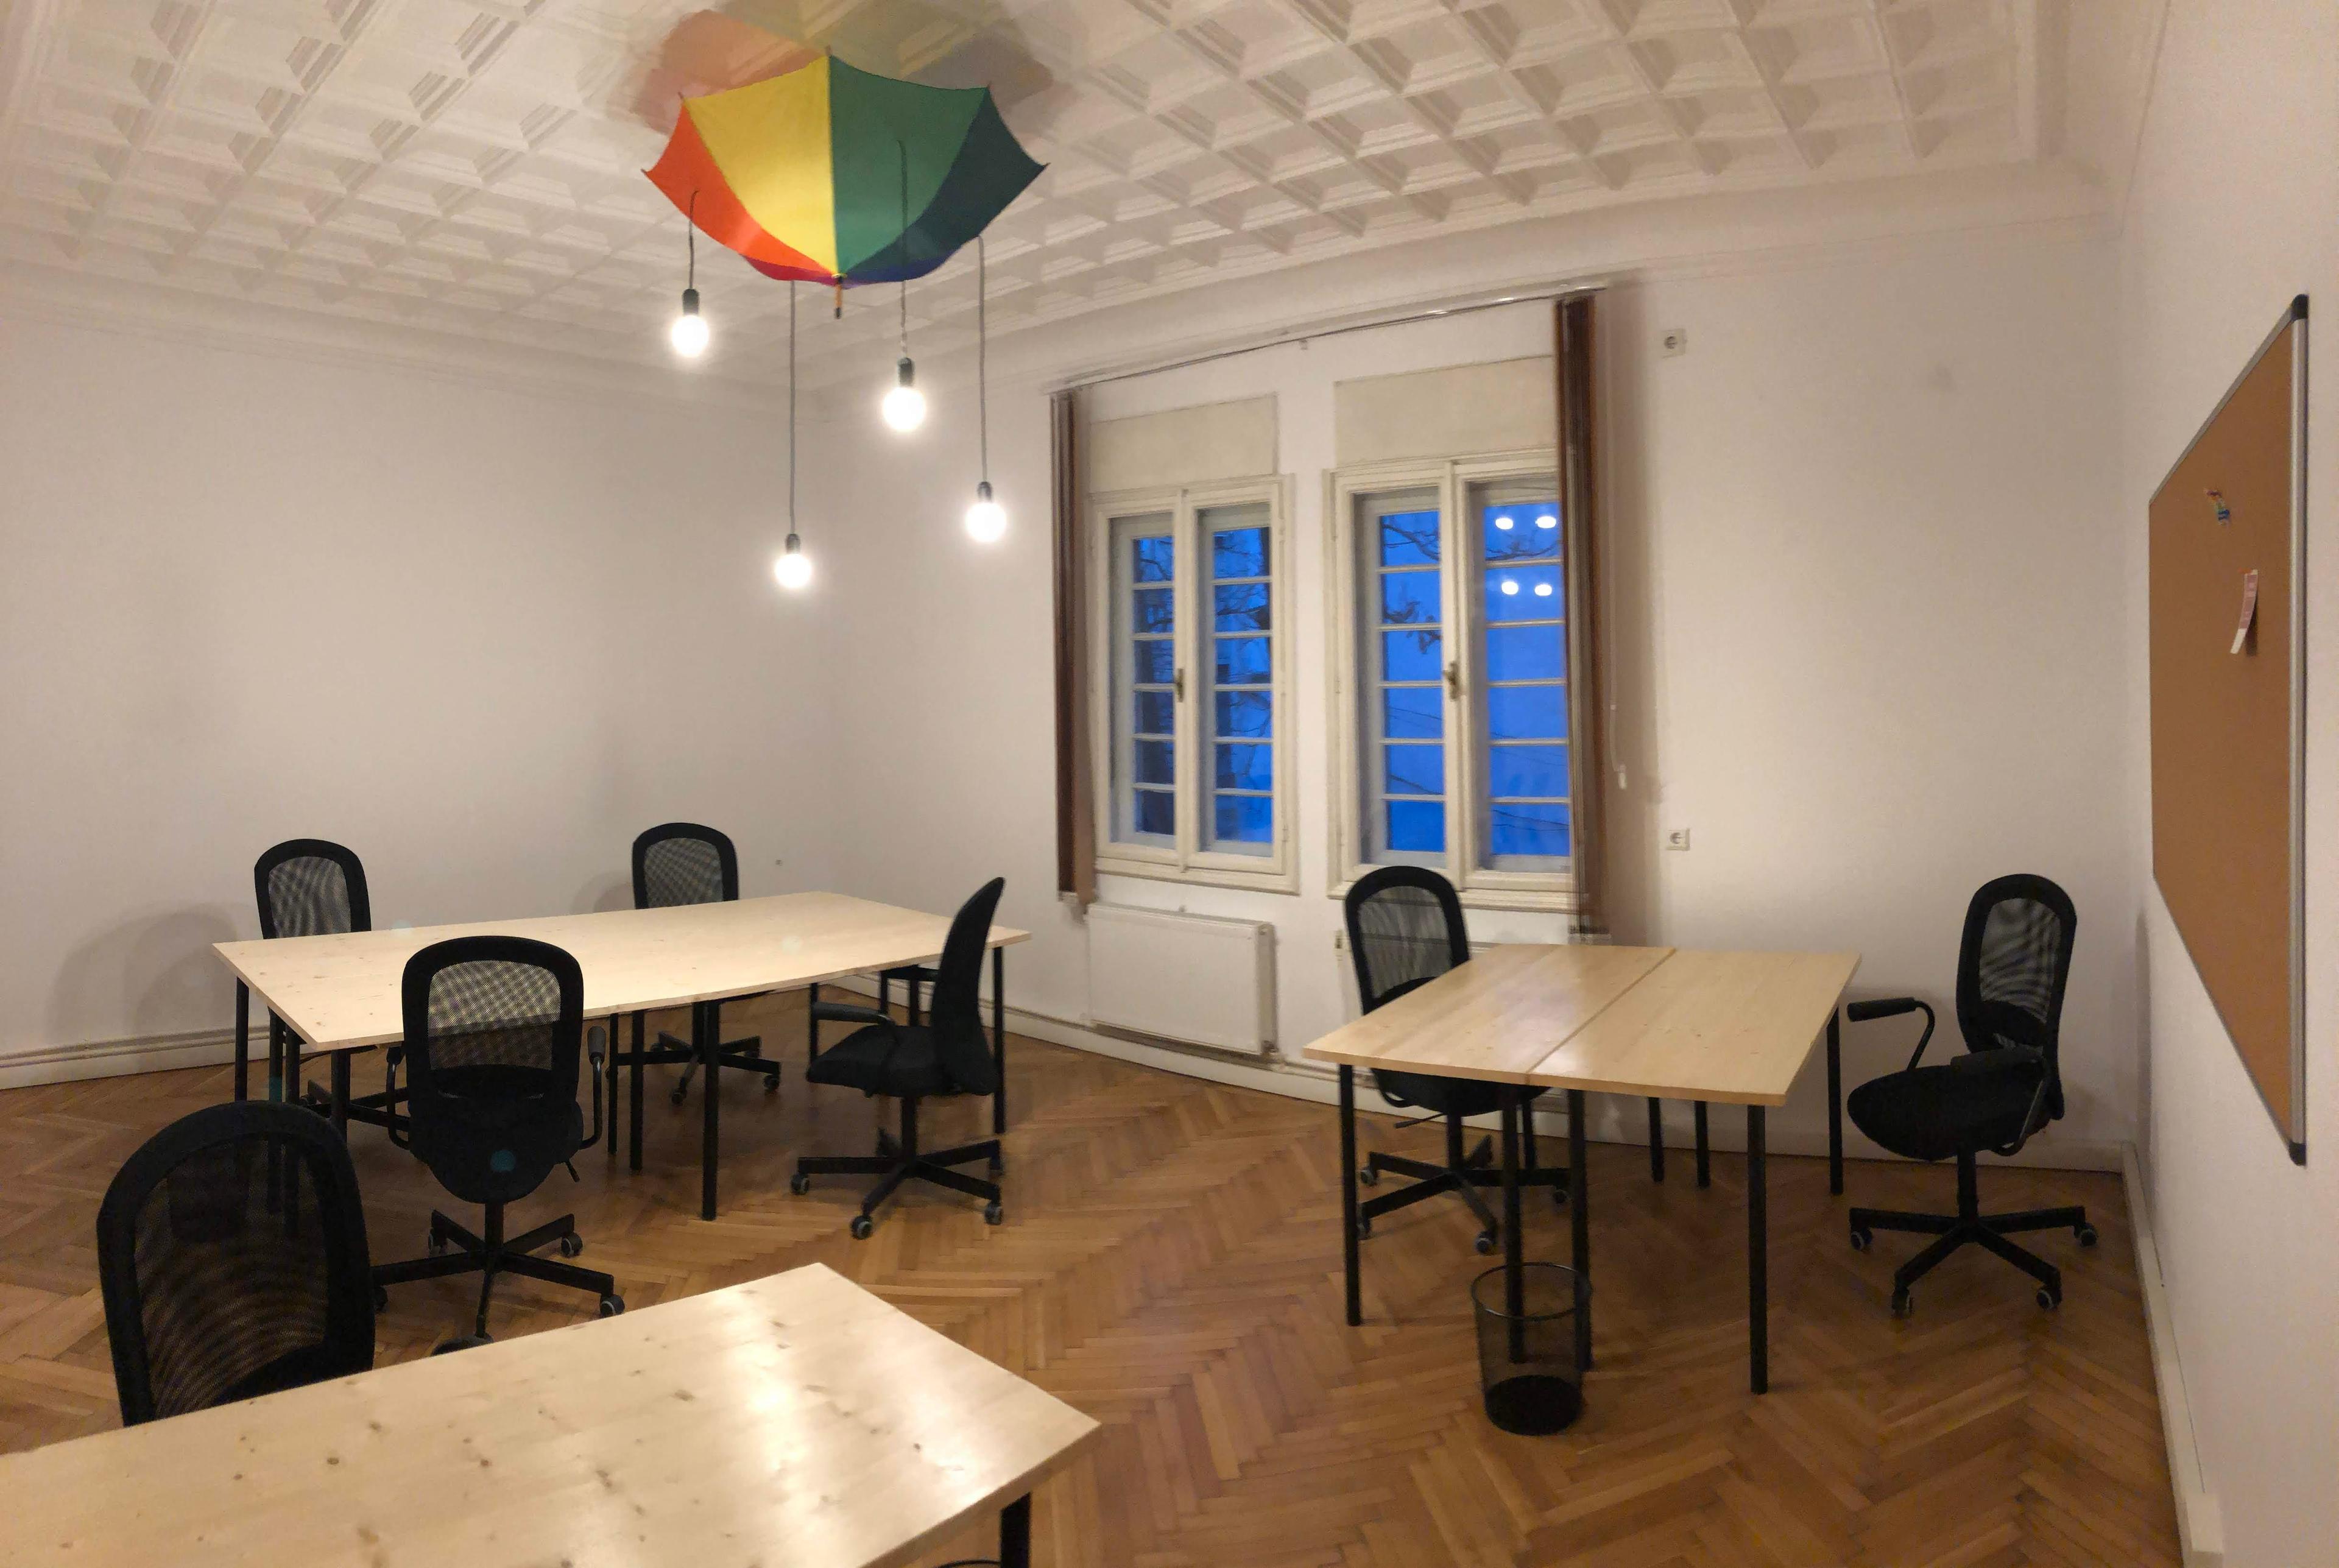 What is a coworking space?